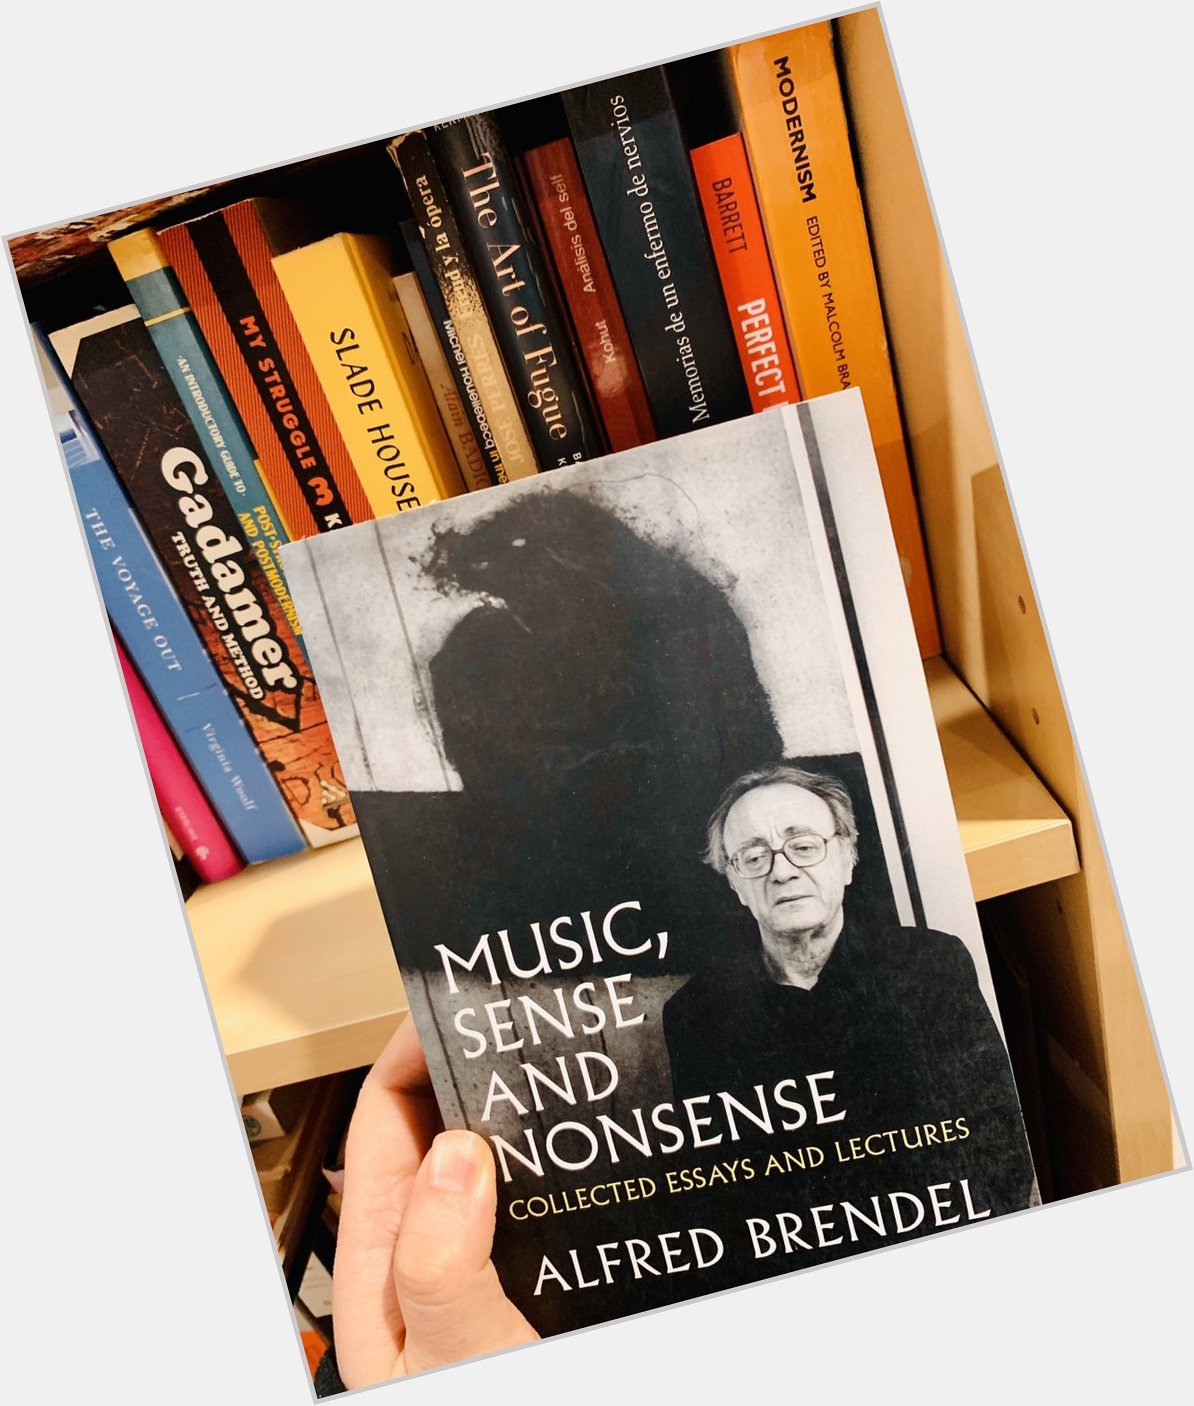 Happy birthday to the great artist Alfred Brendel (1931). 